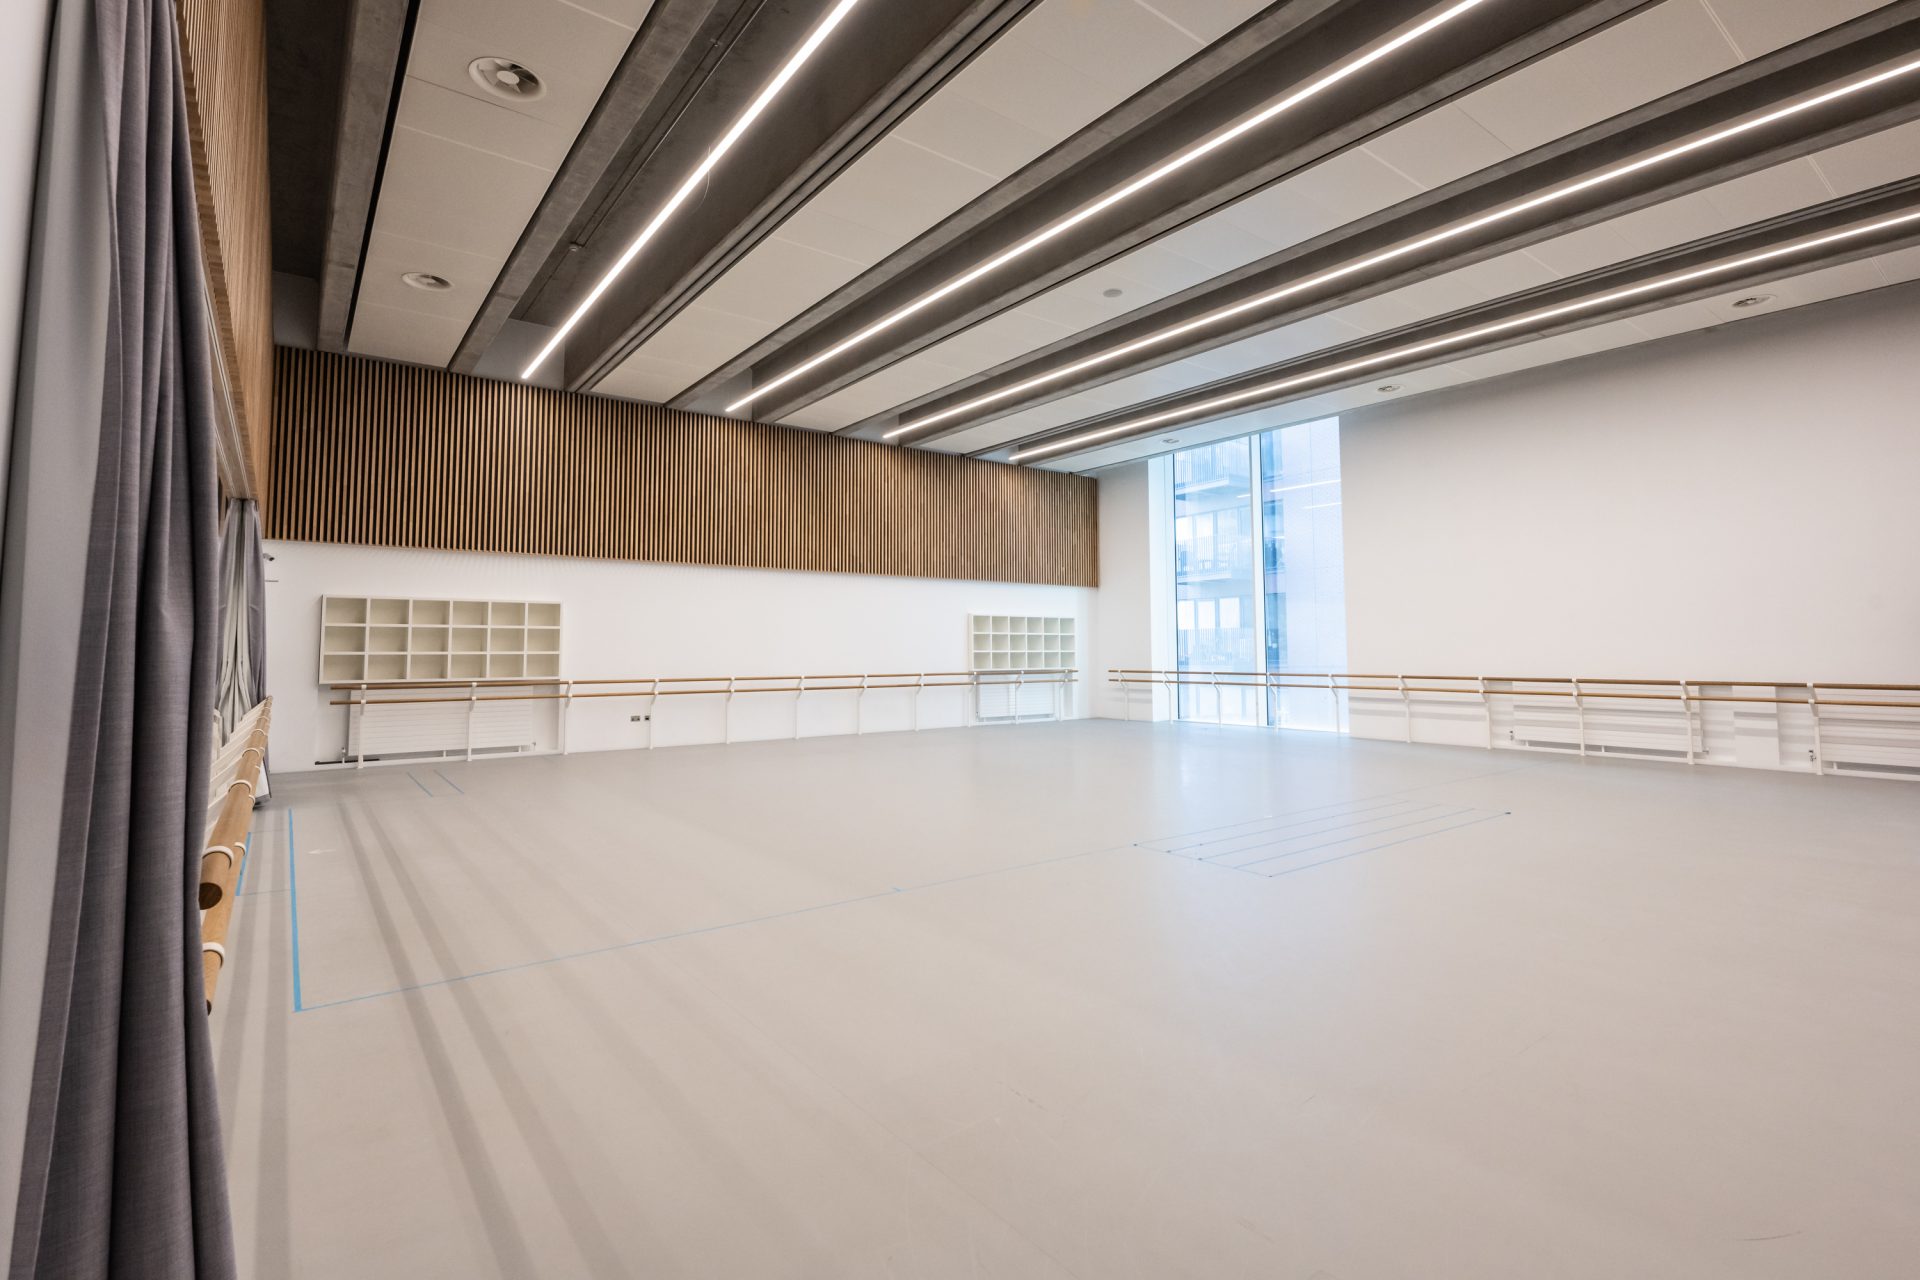 Spacious dance rehearsal studio in London with large windows allowing natural light, wooden barre along the walls, modern lighting, and wooden panel accents on the upper walls.